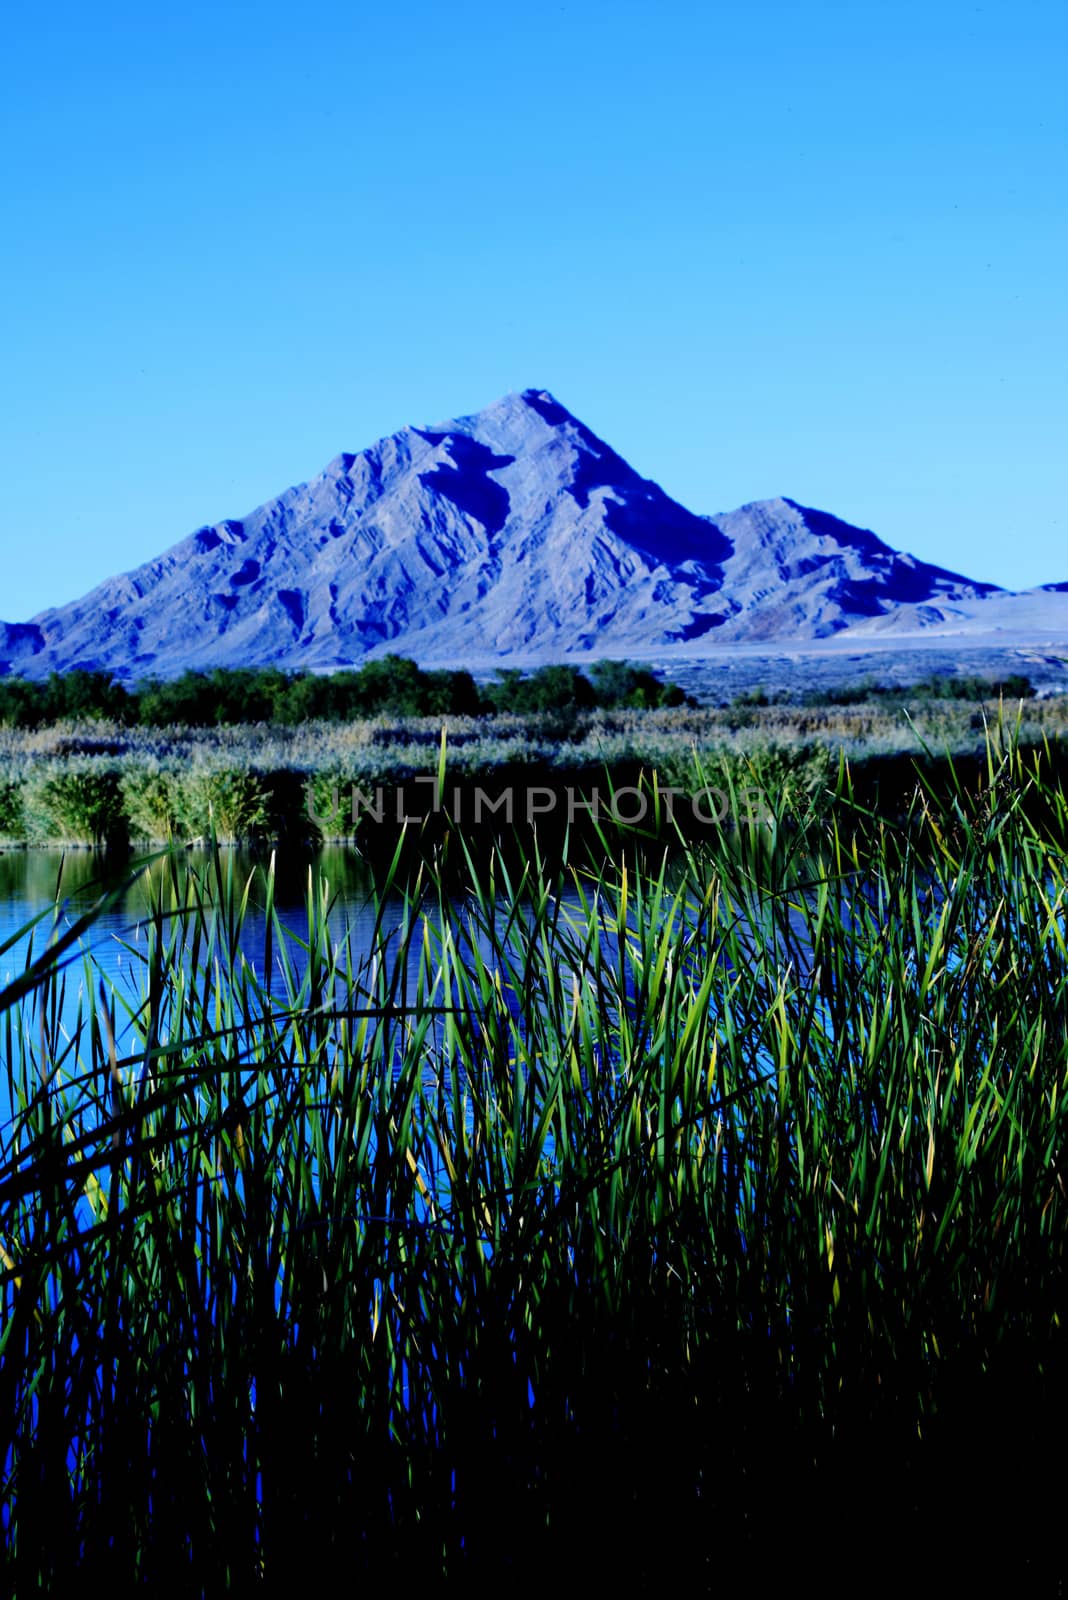 Grass, Water, and a Mountain, Wetlands Park, Las Vegas, Nevada, USA by oskyle